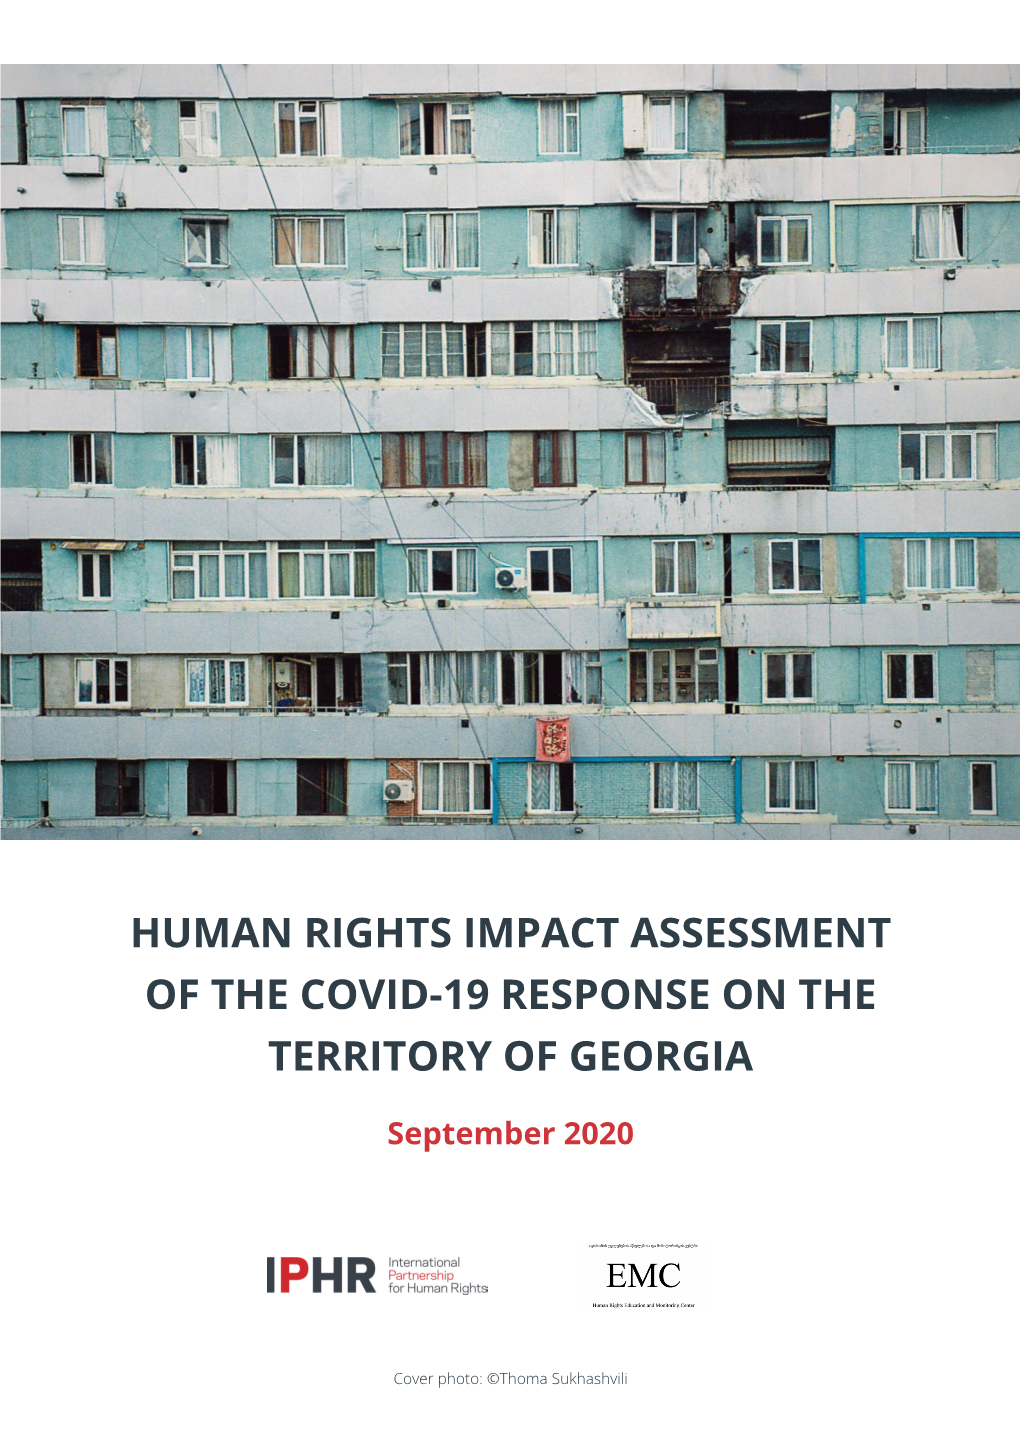 Human Rights Impact Assessment of the Covid-19 Response on the Territory of Georgia